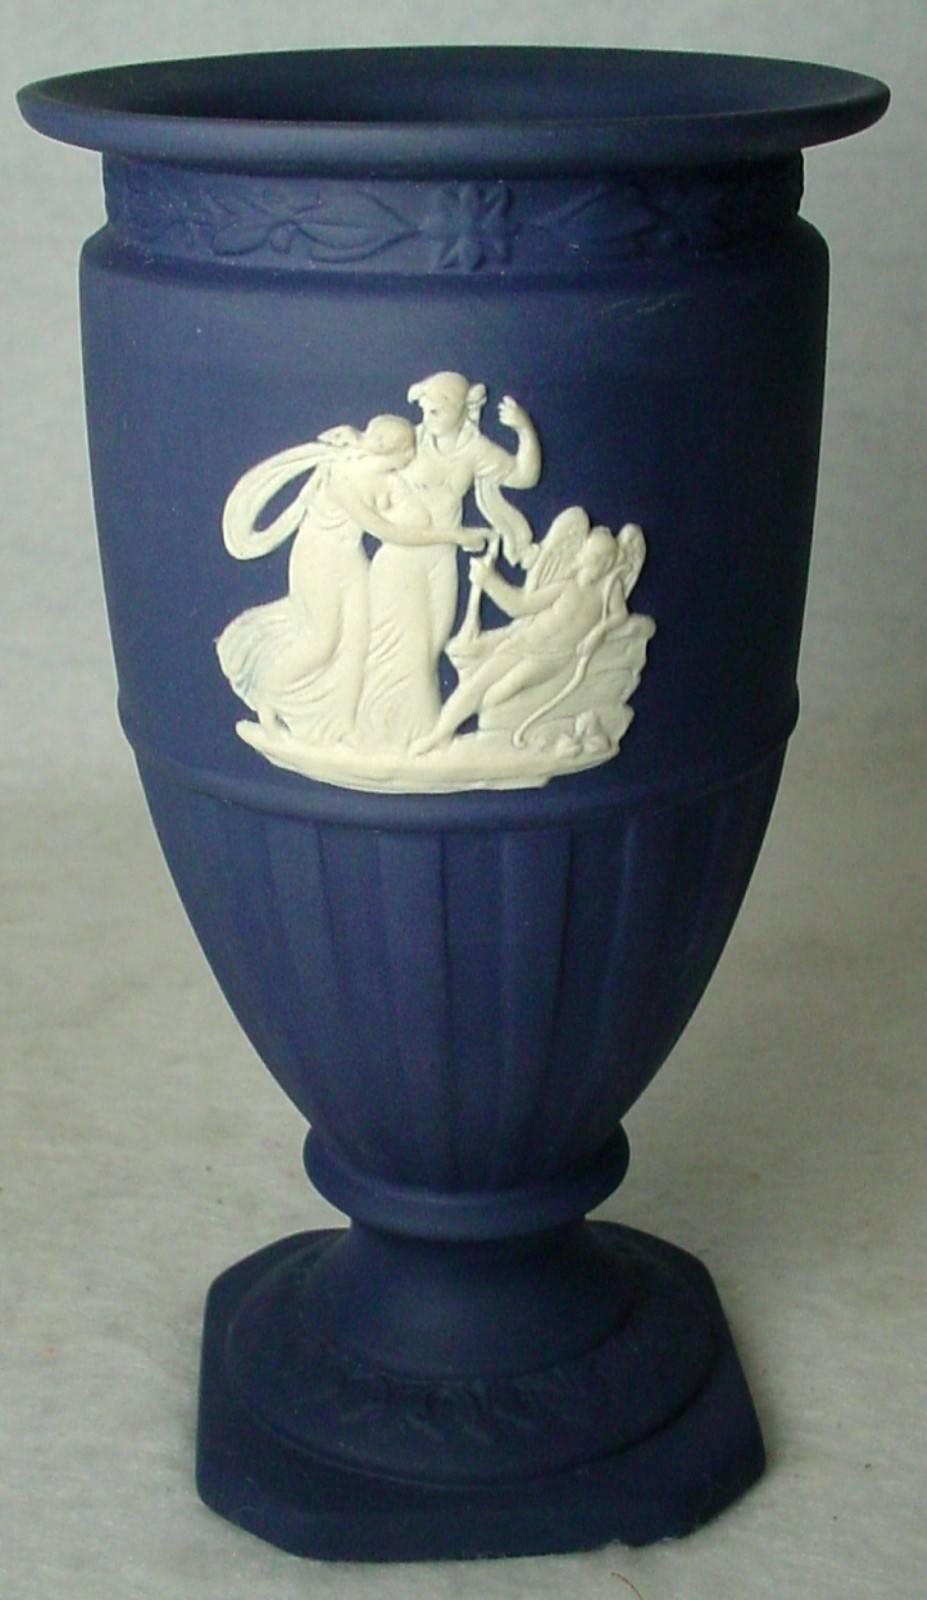  Offered here is a very lovely Wedgwood Midnight blue Jasperware 'Goddesses pattern' footed vase in excellent condition!
Midnight blue with beautiful white and blue designs. Measures about 5